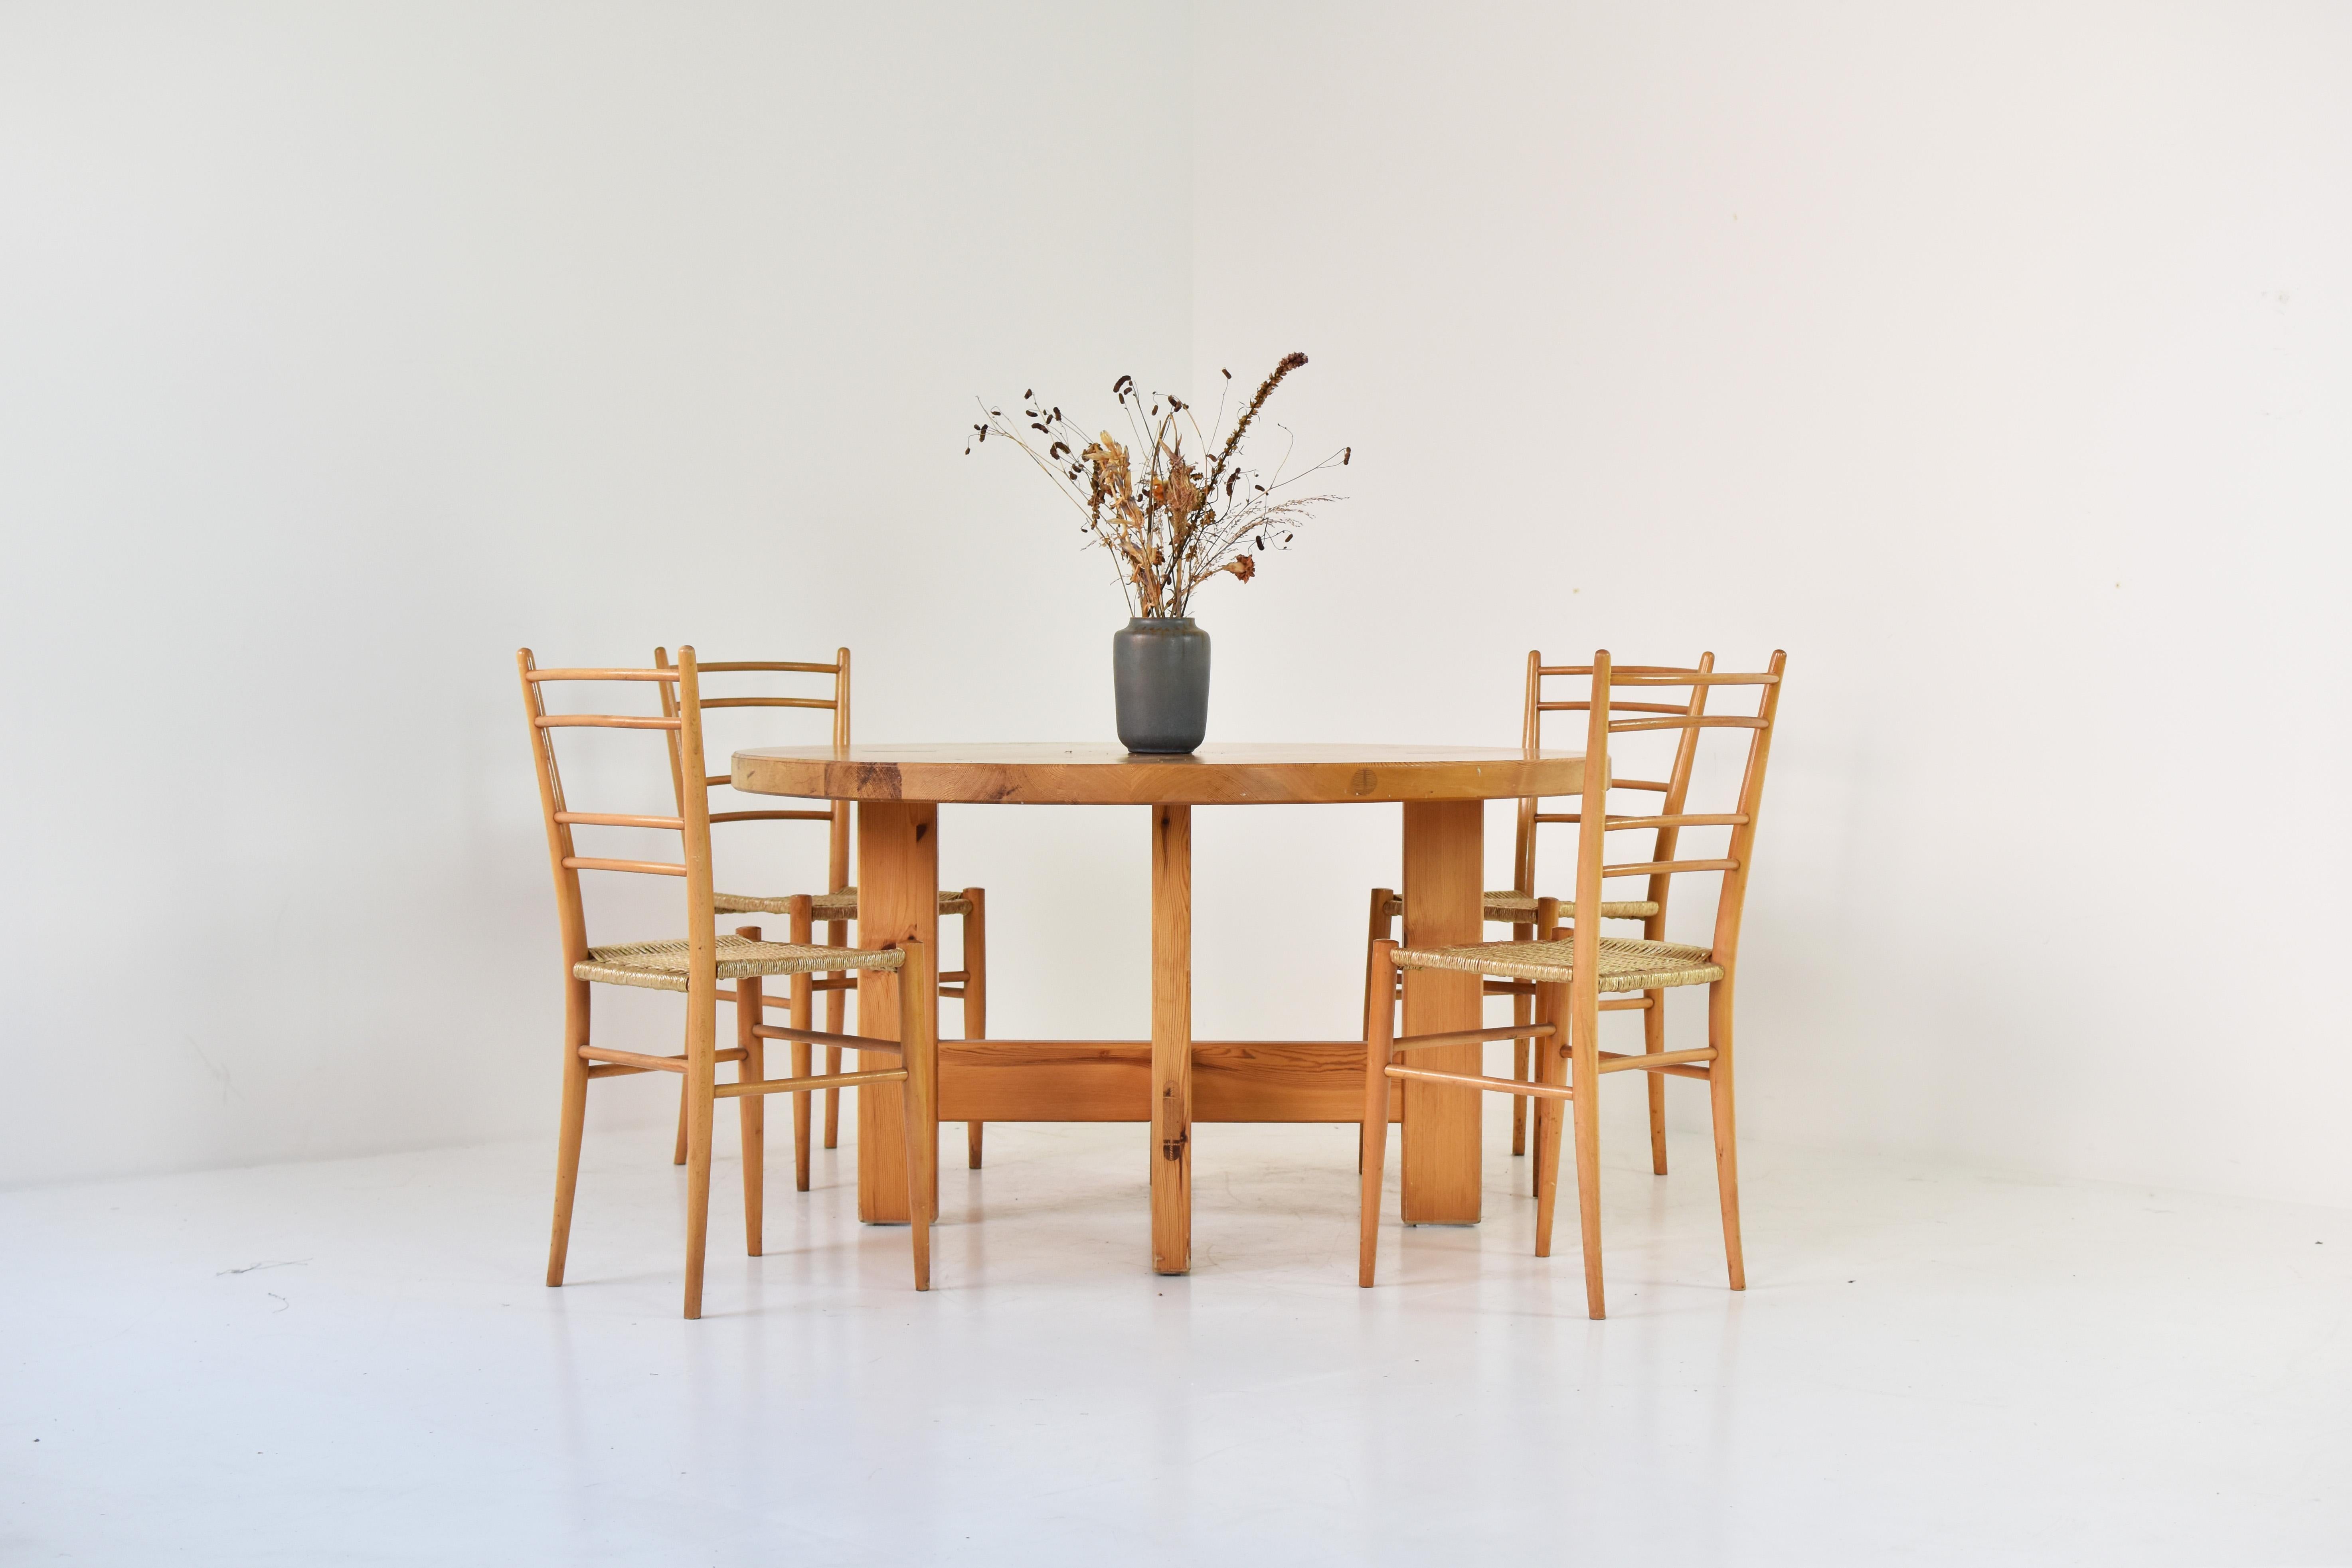 Pine Dining table by Roland Wilhelmsson for Karl Andersson and Soner, Sweden 1970s.